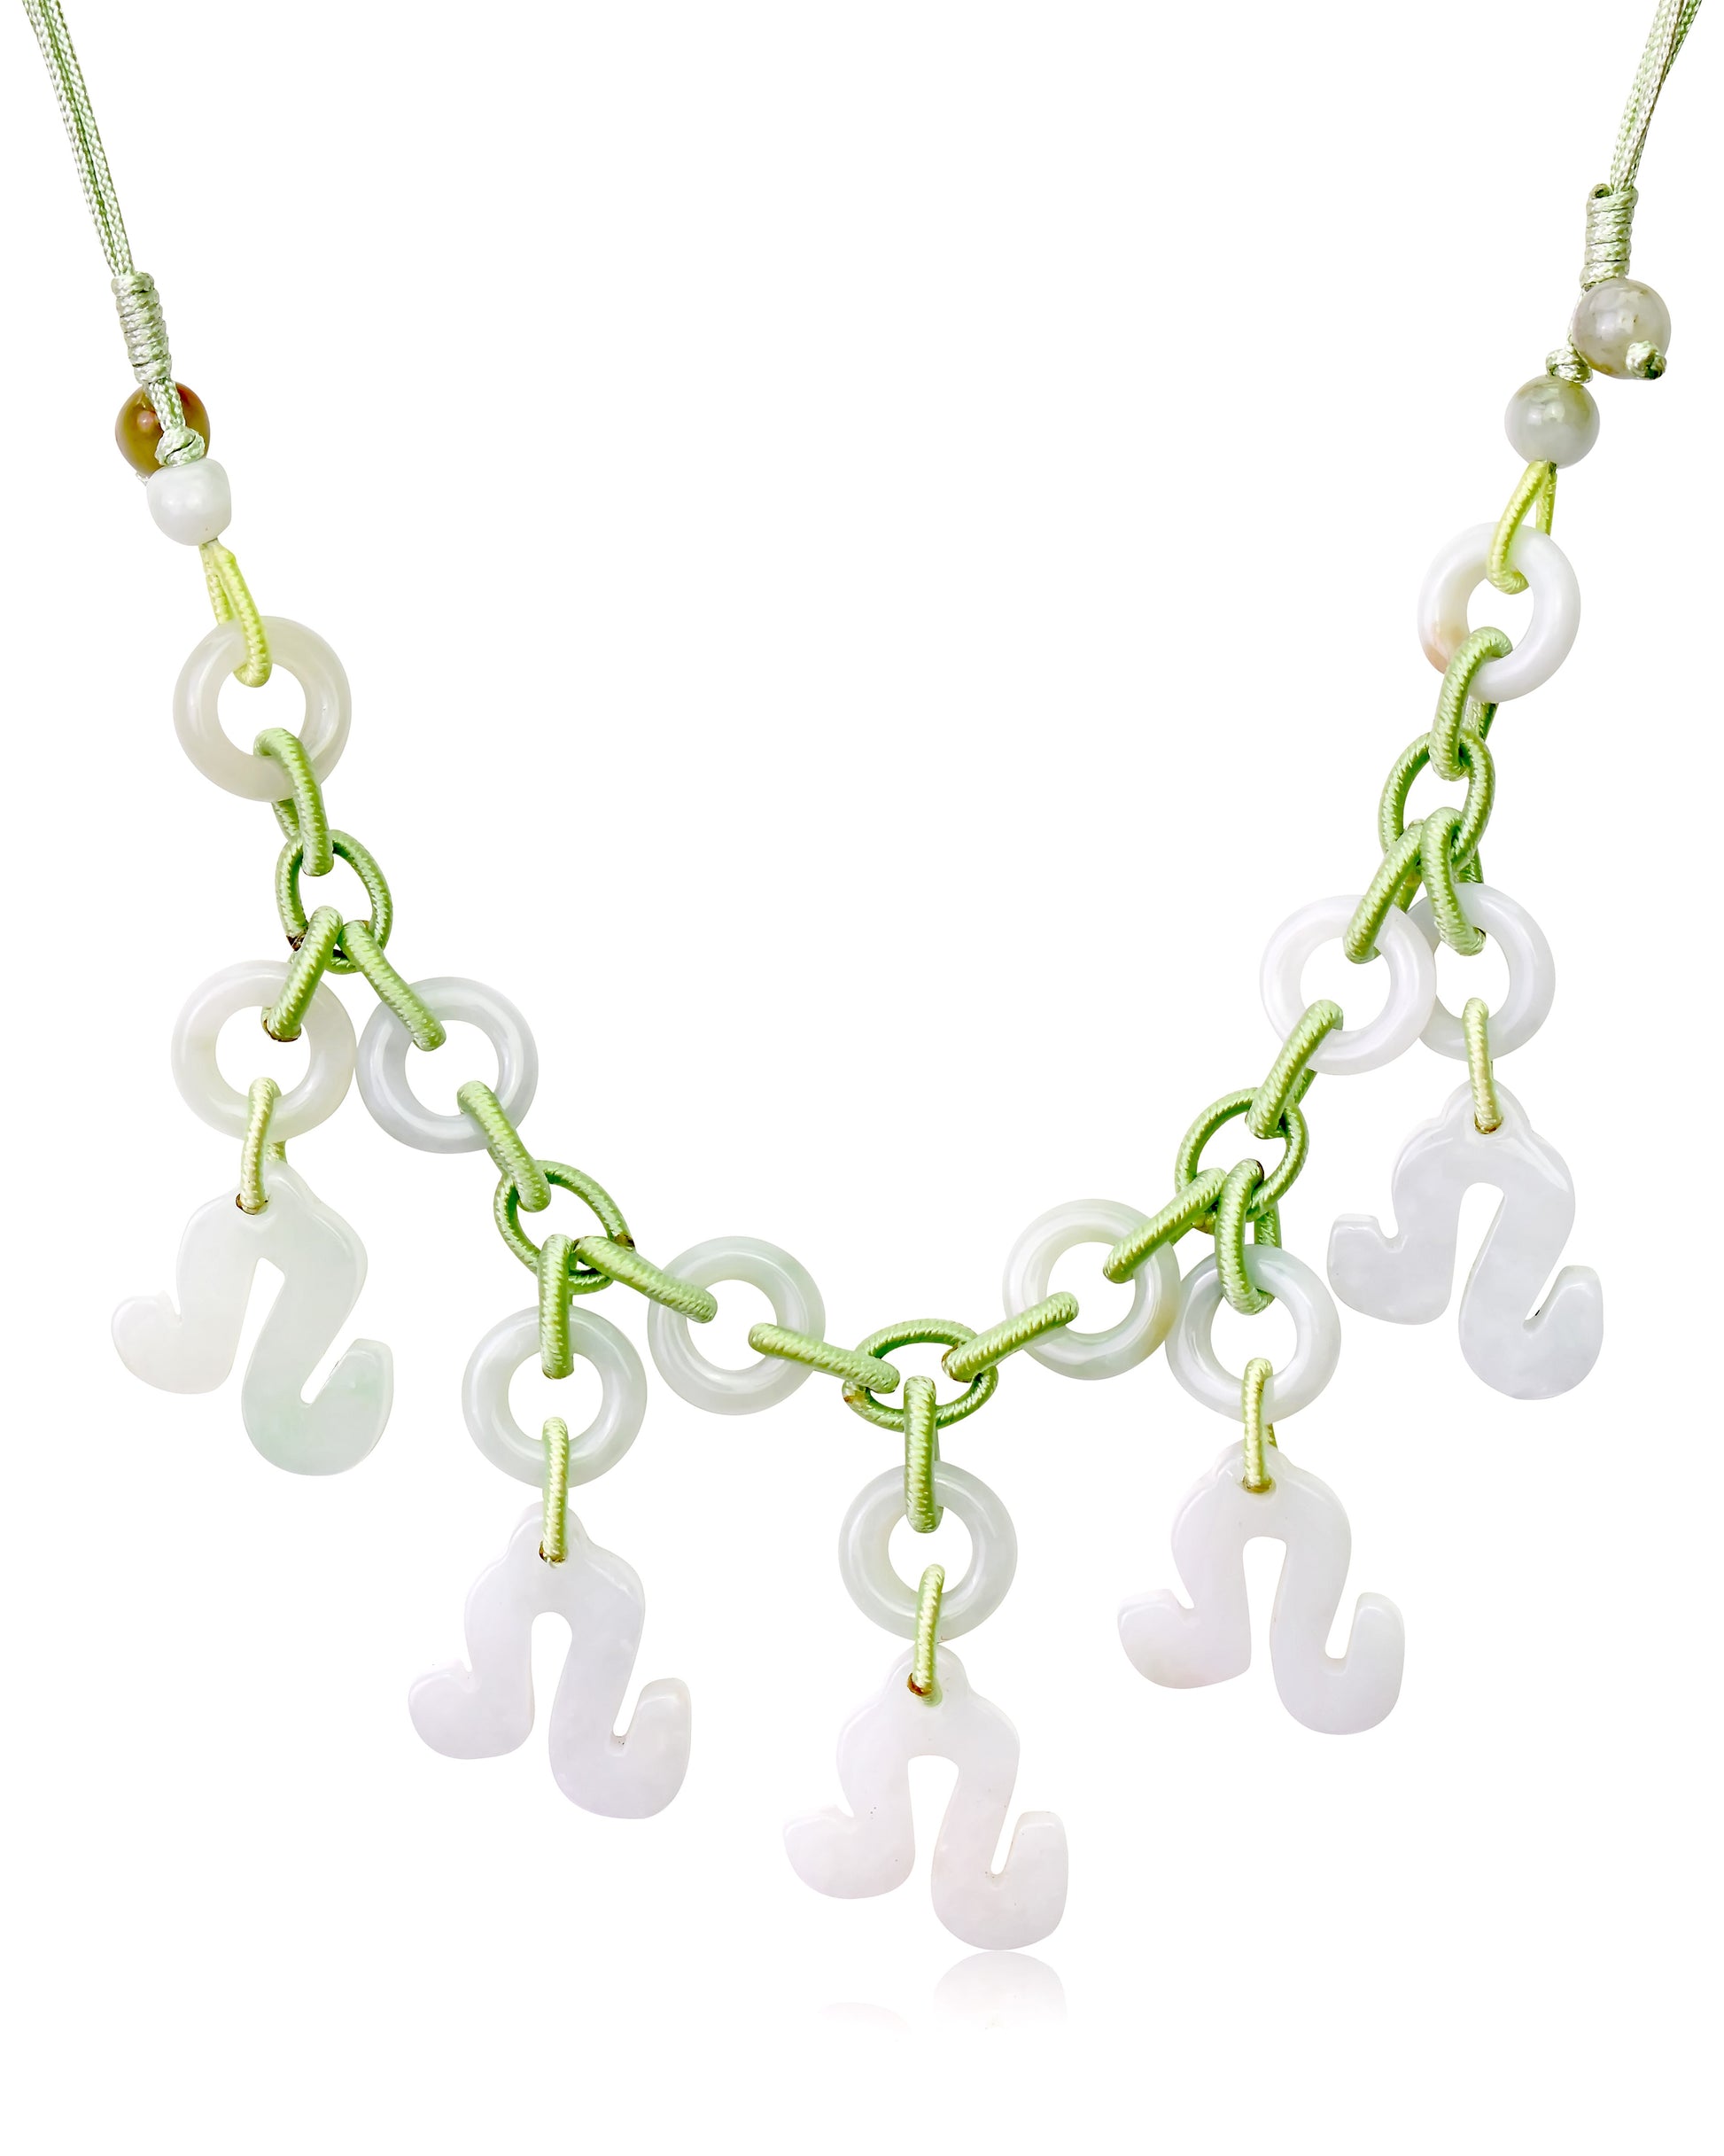 Stand Out with a Uniquely Crafted Leo Handmade Jade Necklace made with Sea Green Cord